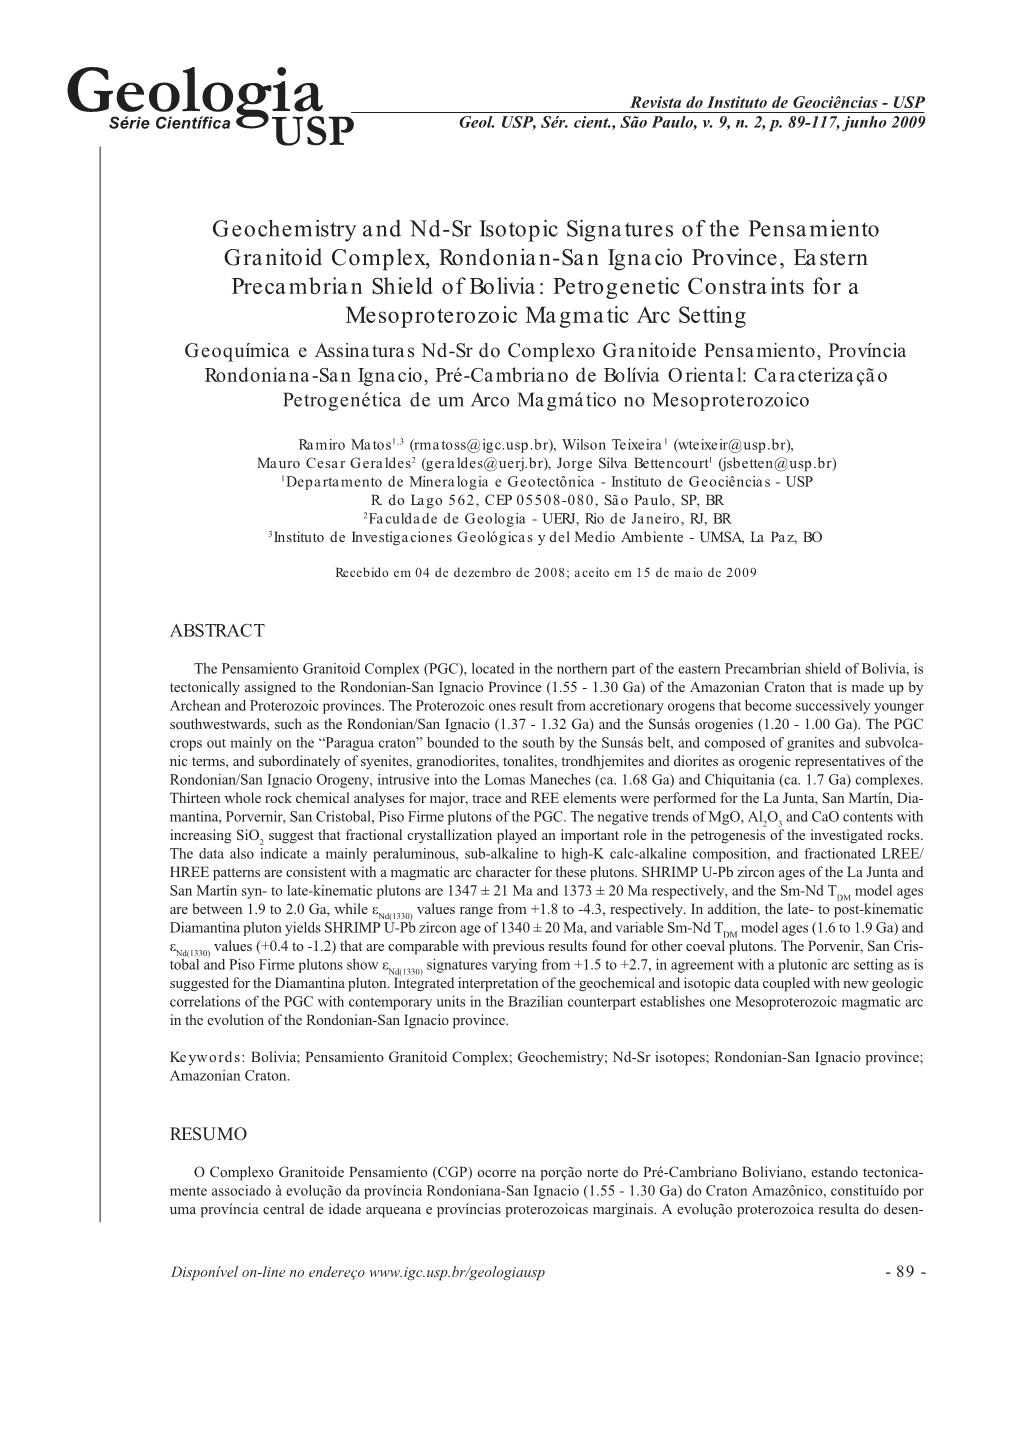 Geochemistry and Nd-Sr Isotopic Signatures Of